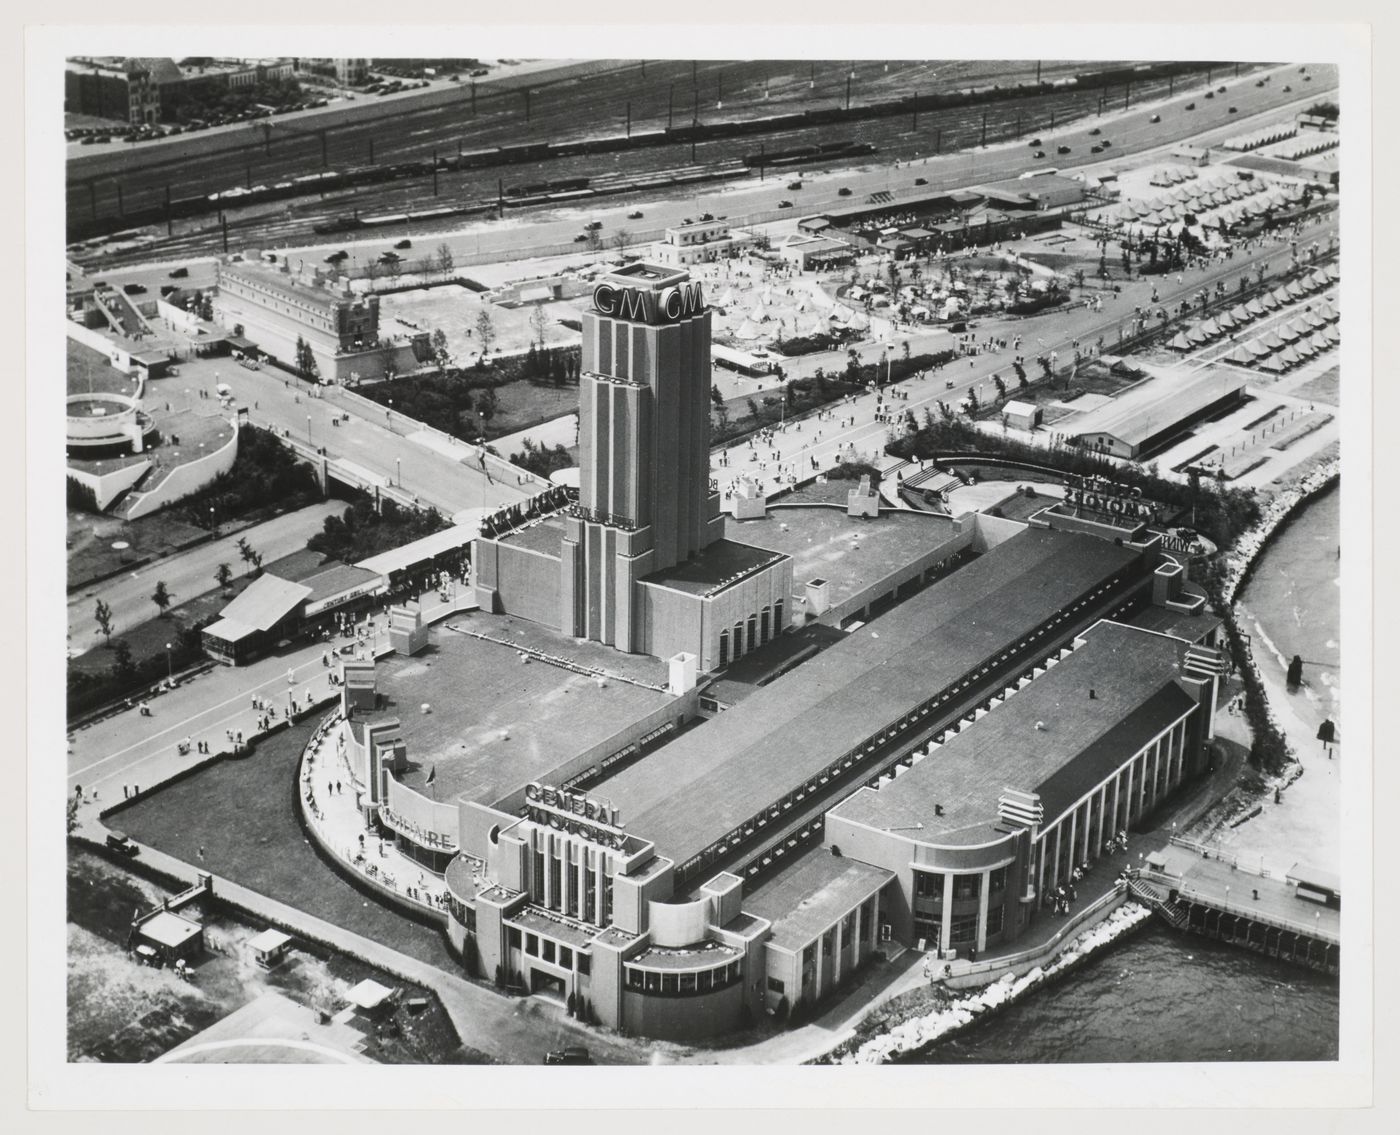 Aerial view of the General Motors Corporation pavilion showing the surrounding fair expositions, 1933-1934 Chicago World's Fair, Chicago, Illinois